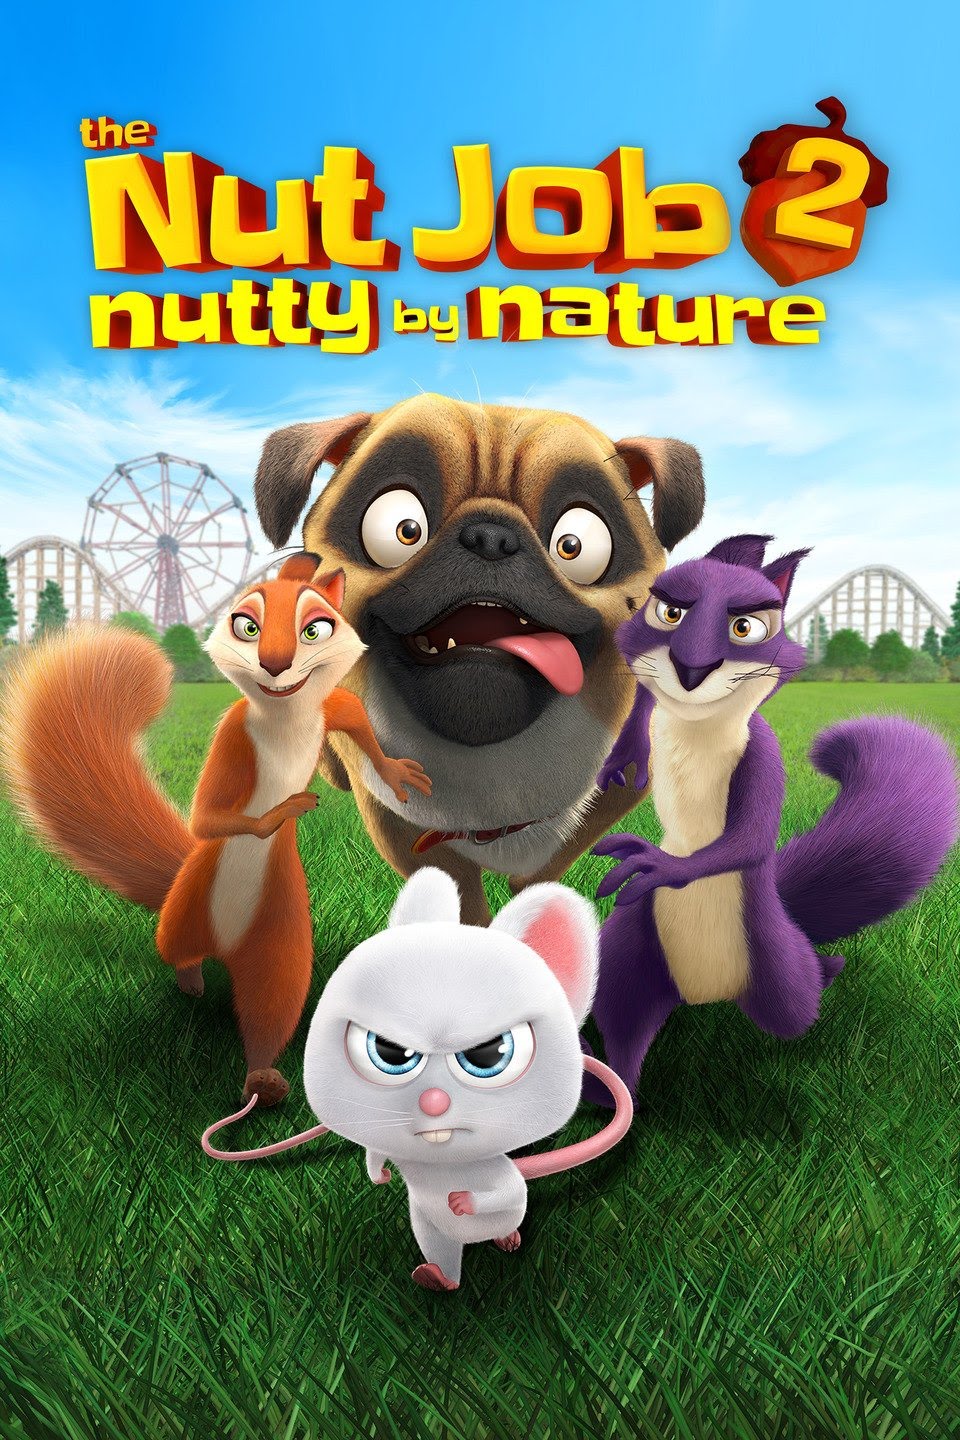 The Nut Job 2: Nutty By Nature (2017) Vudu or Movies Anywhere HD redemption only